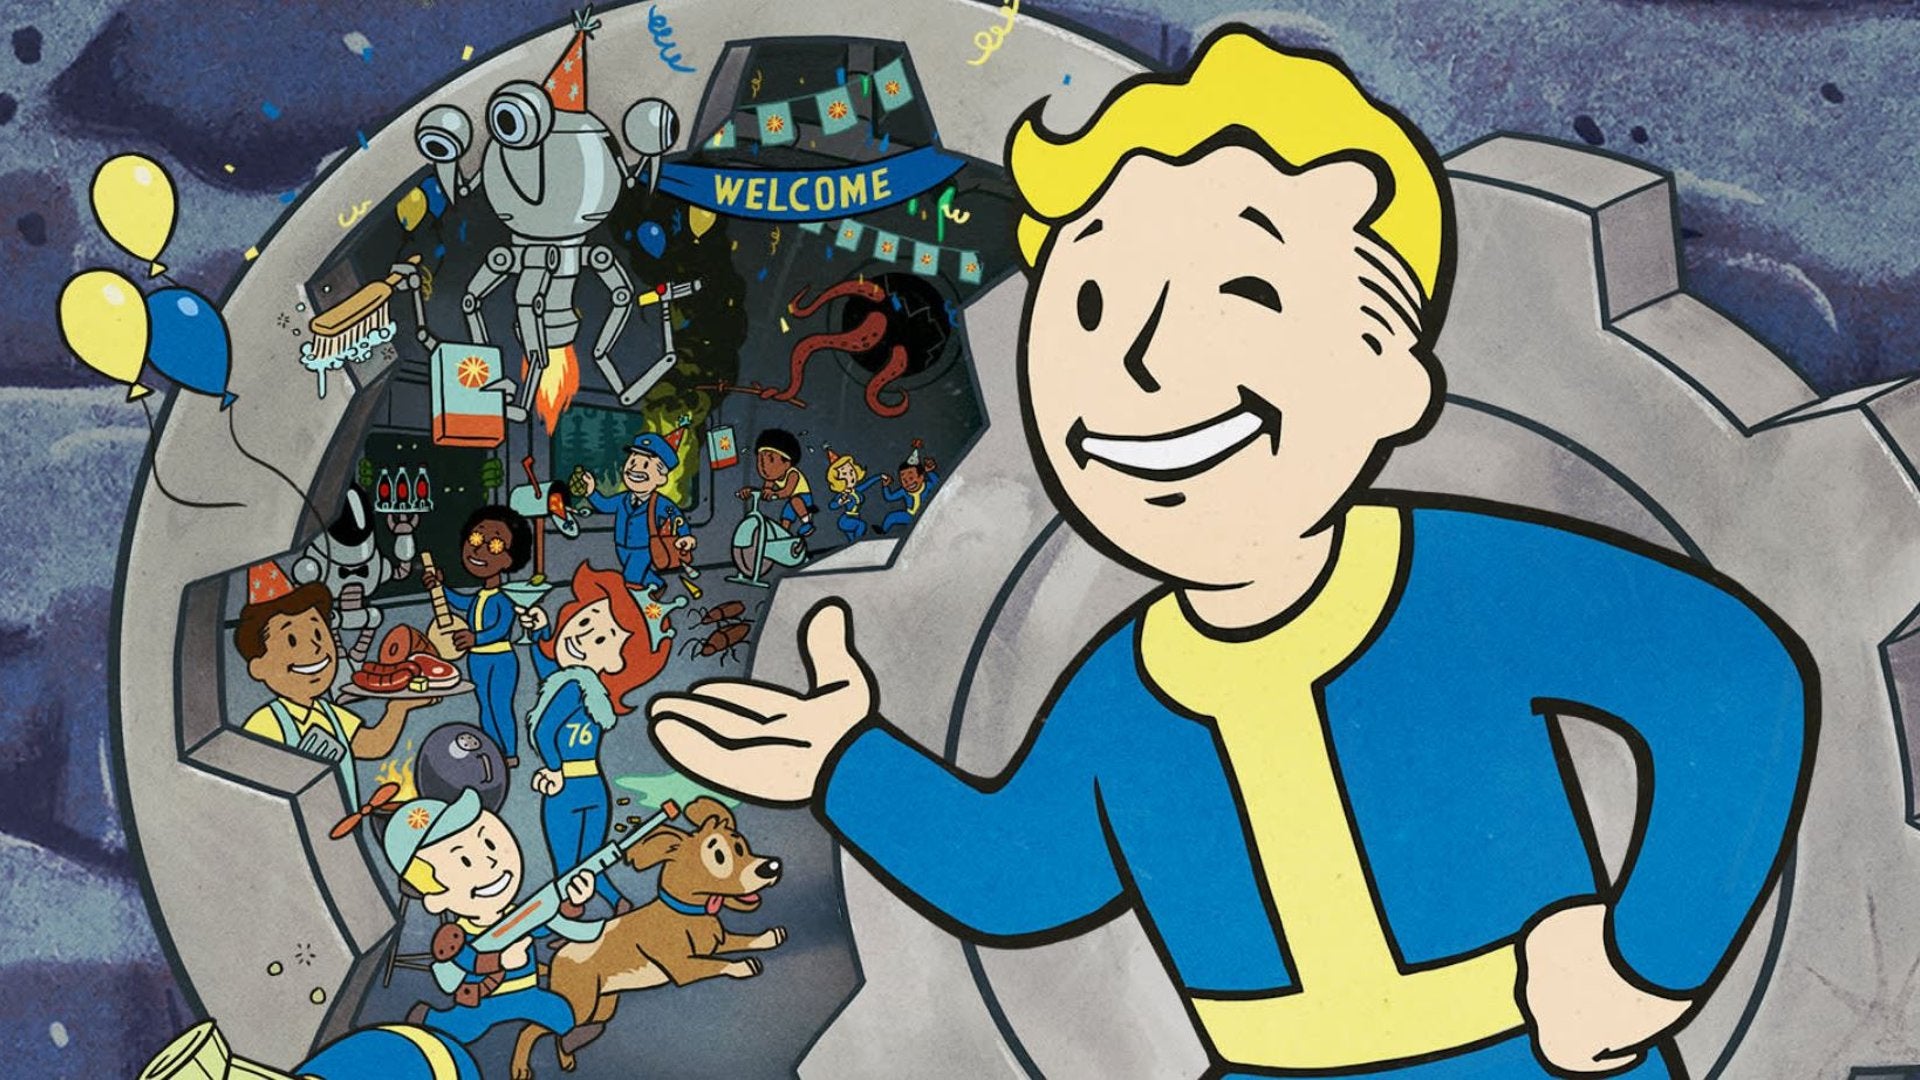 Fallout 76 is a post-apocalyptic massively multiplayer online RPG from Bethesda Game Studios.